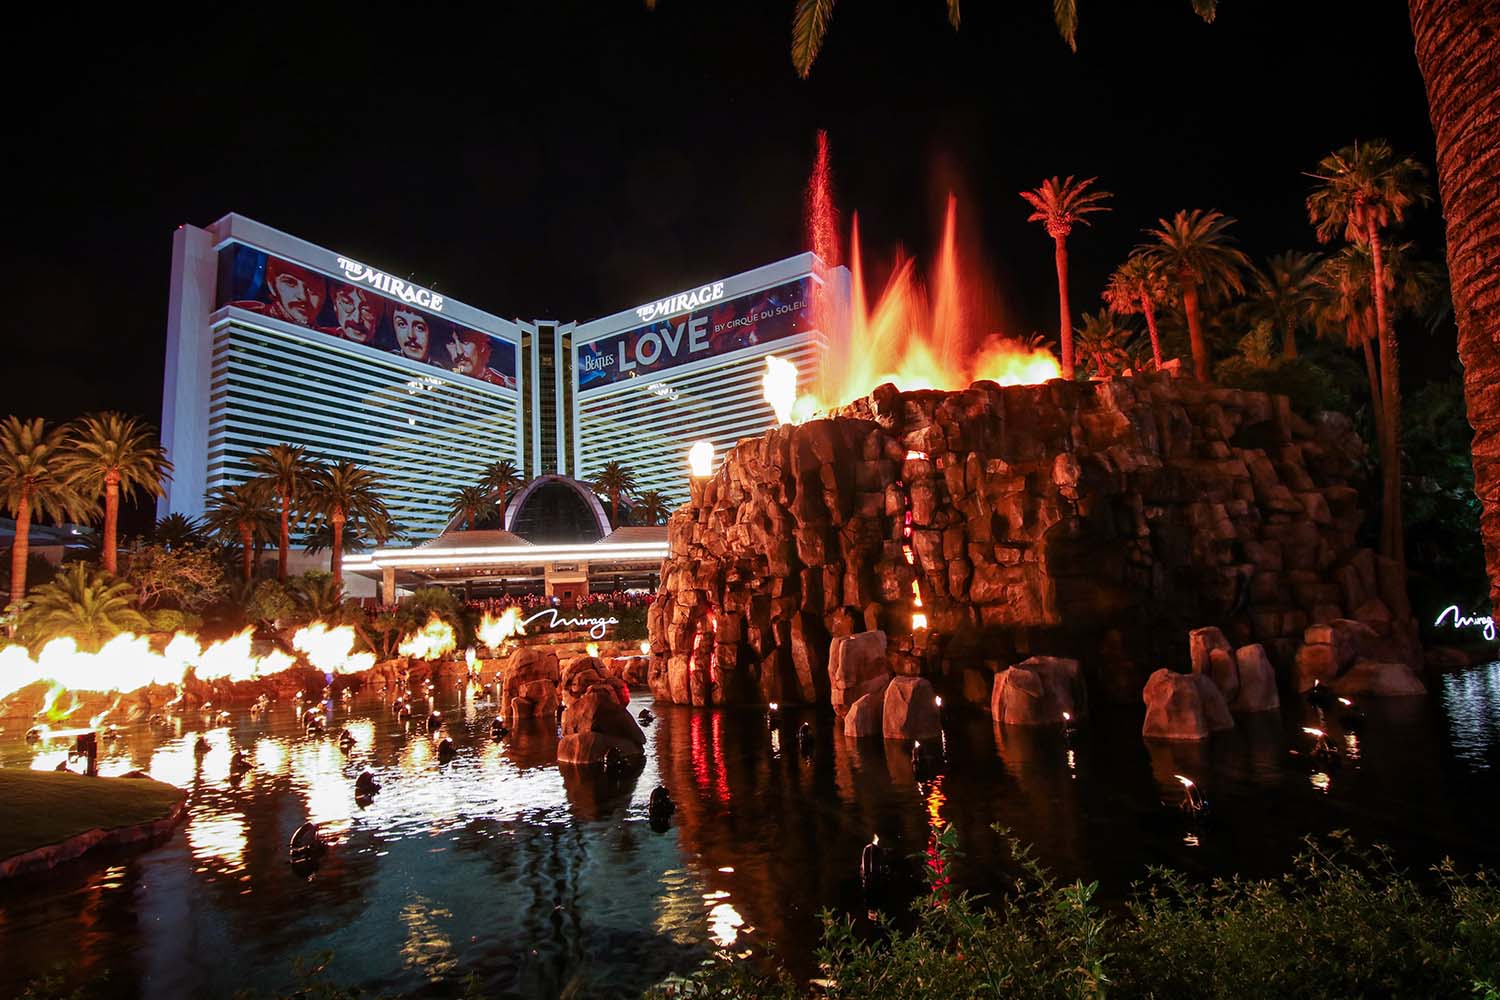 Video/Photos: BAT OUT OF HELL Lands In Las Vegas At Paris Hotel & Casino!